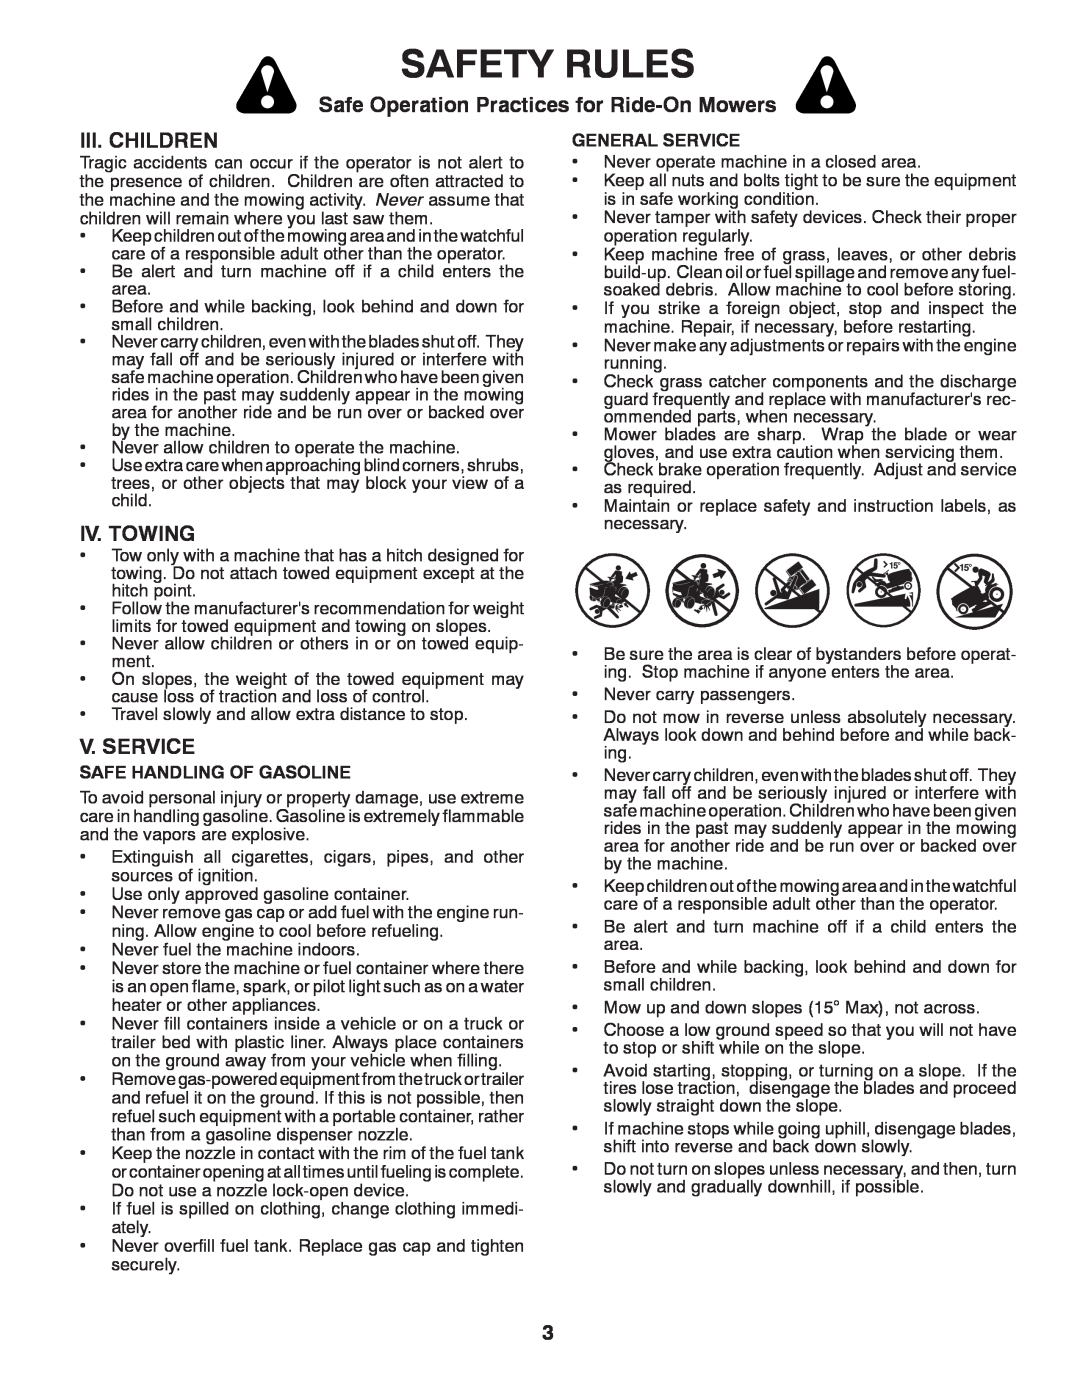 Poulan 418769 manual Safety Rules, Safe Operation Practices for Ride-On Mowers, Iii. Children, Iv. Towing, V. Service 